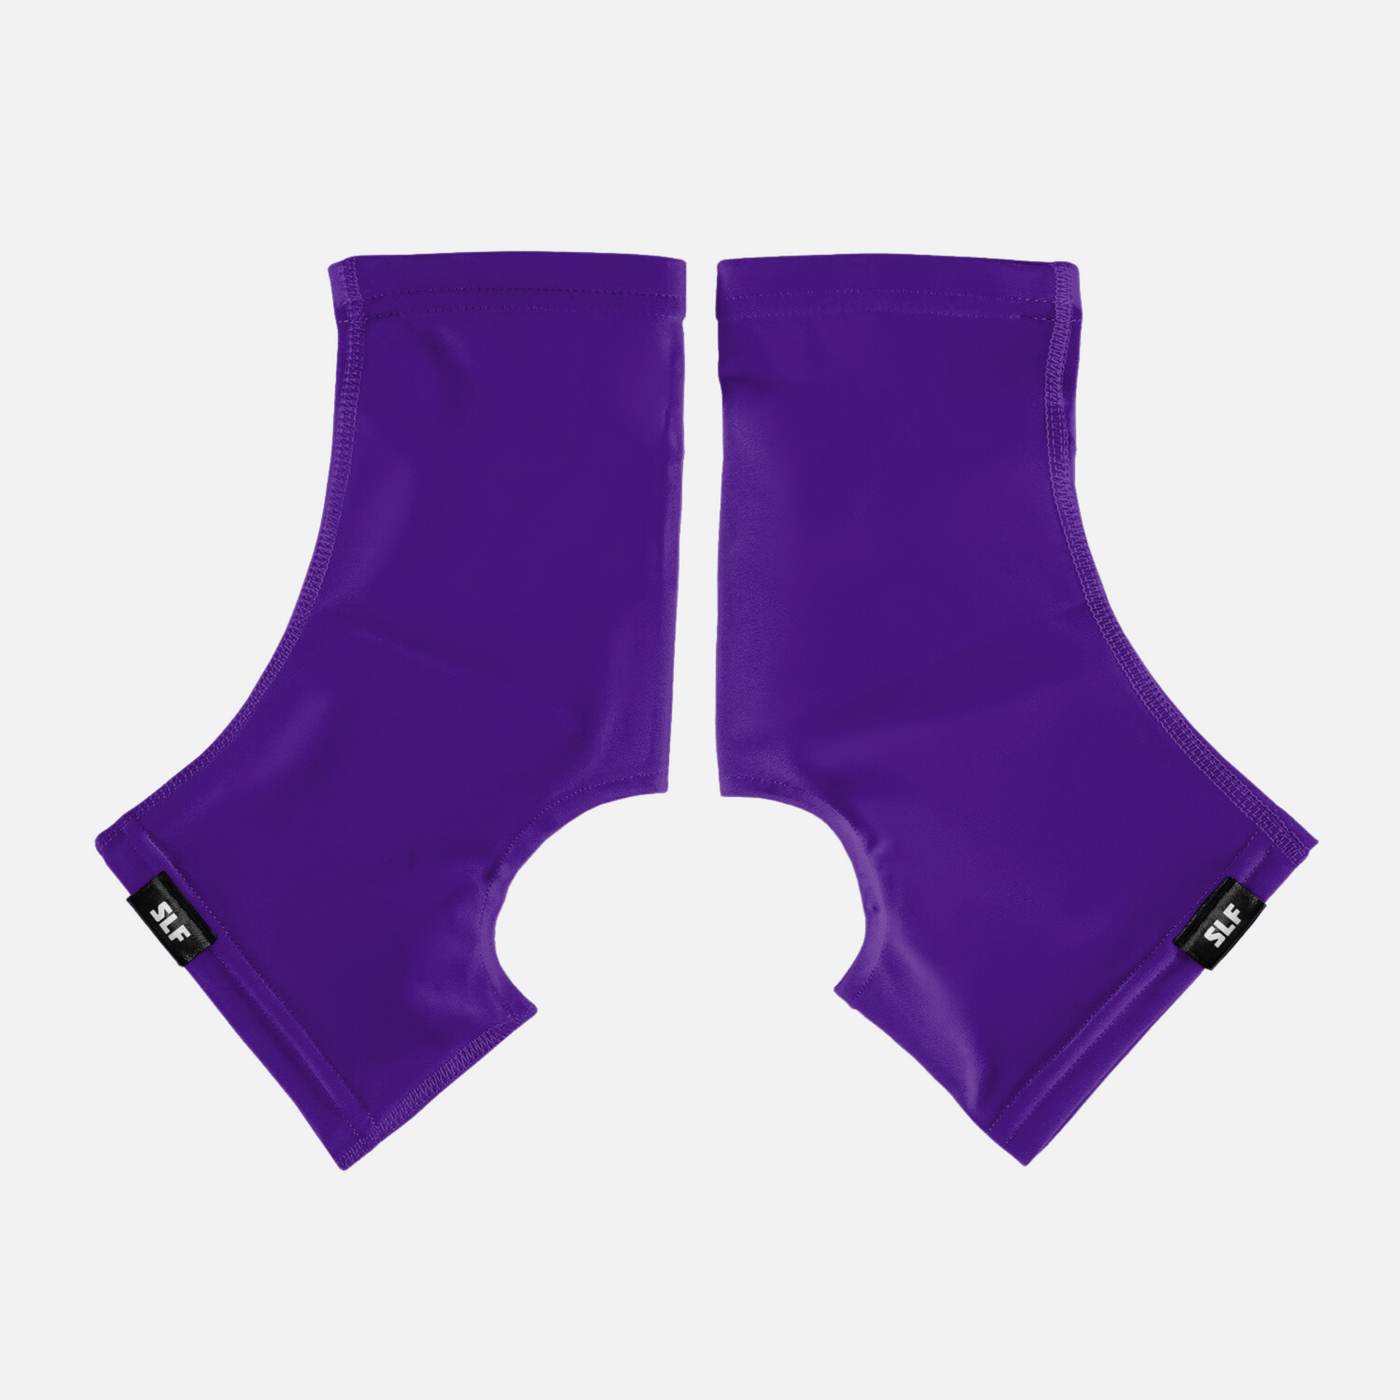 Hue Purple Spats / Cleat Covers